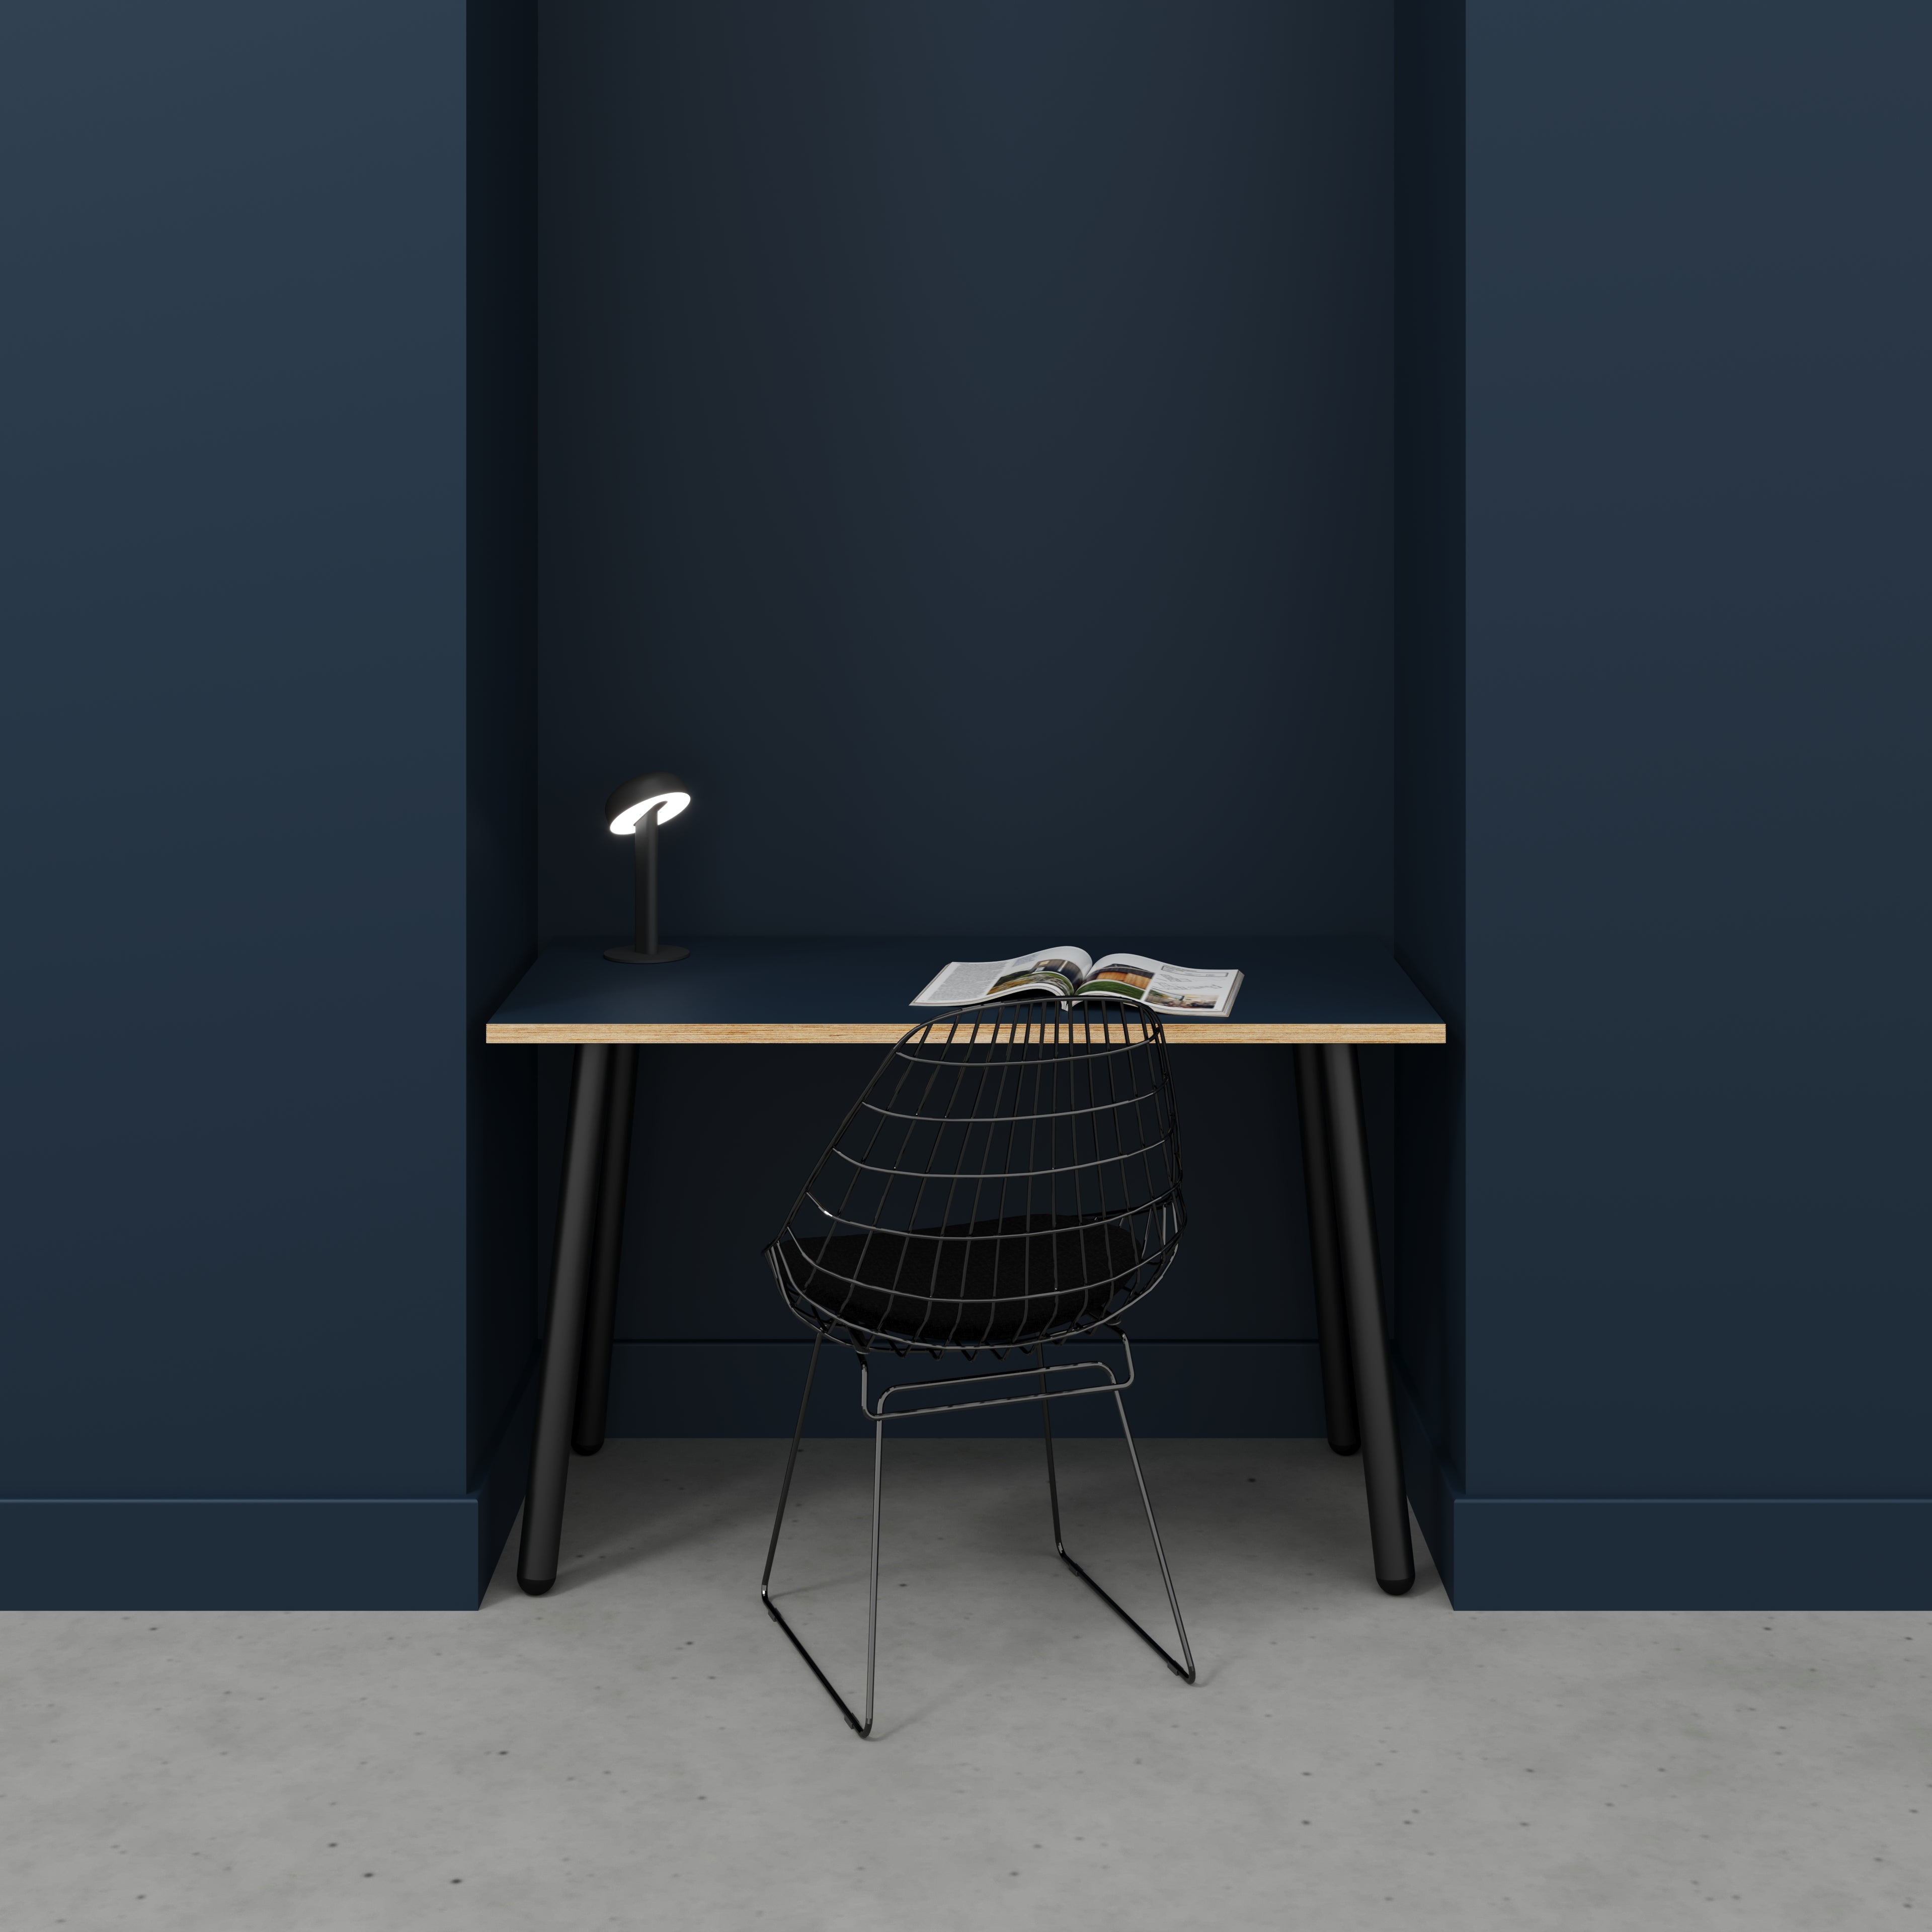 Desk with Black Round Single Pin Legs - Formica Night Sea Blue - 1200(w) x 600(d) x 735(h)